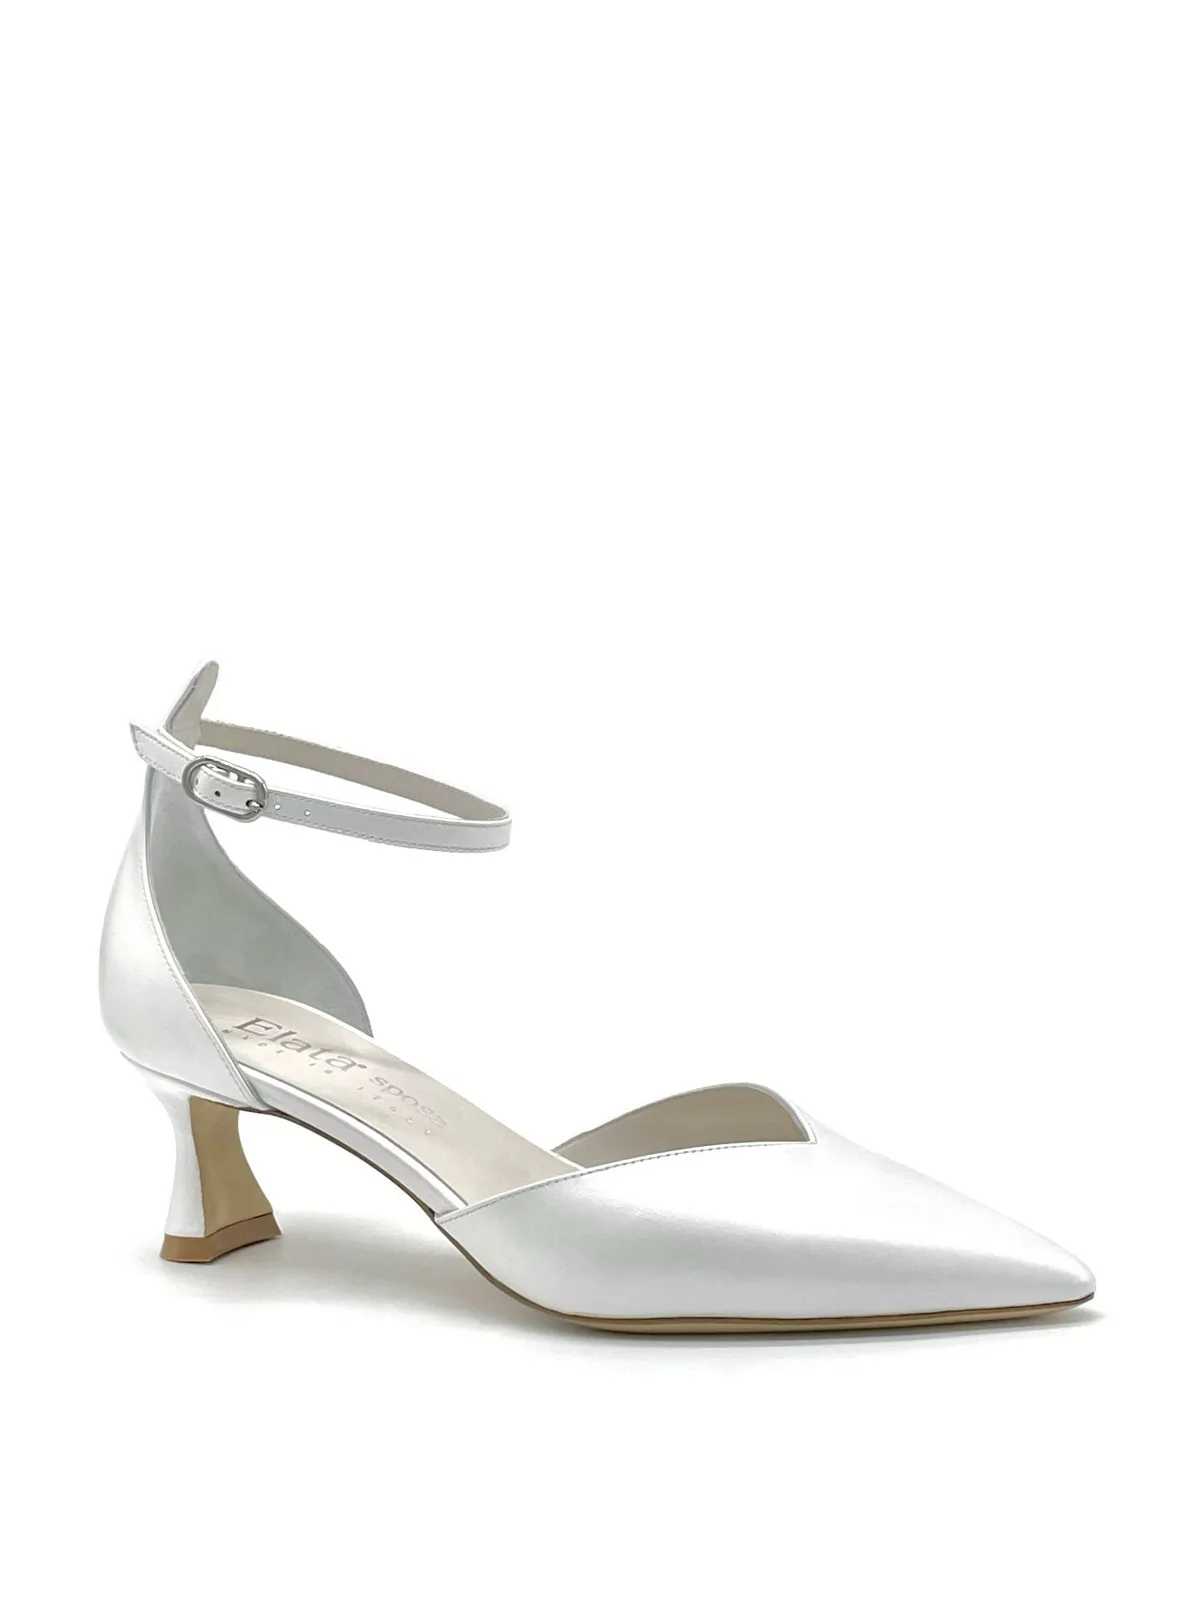 White pearl leather D’orsay with ankle strap. Leather lining, leather sole. 5,